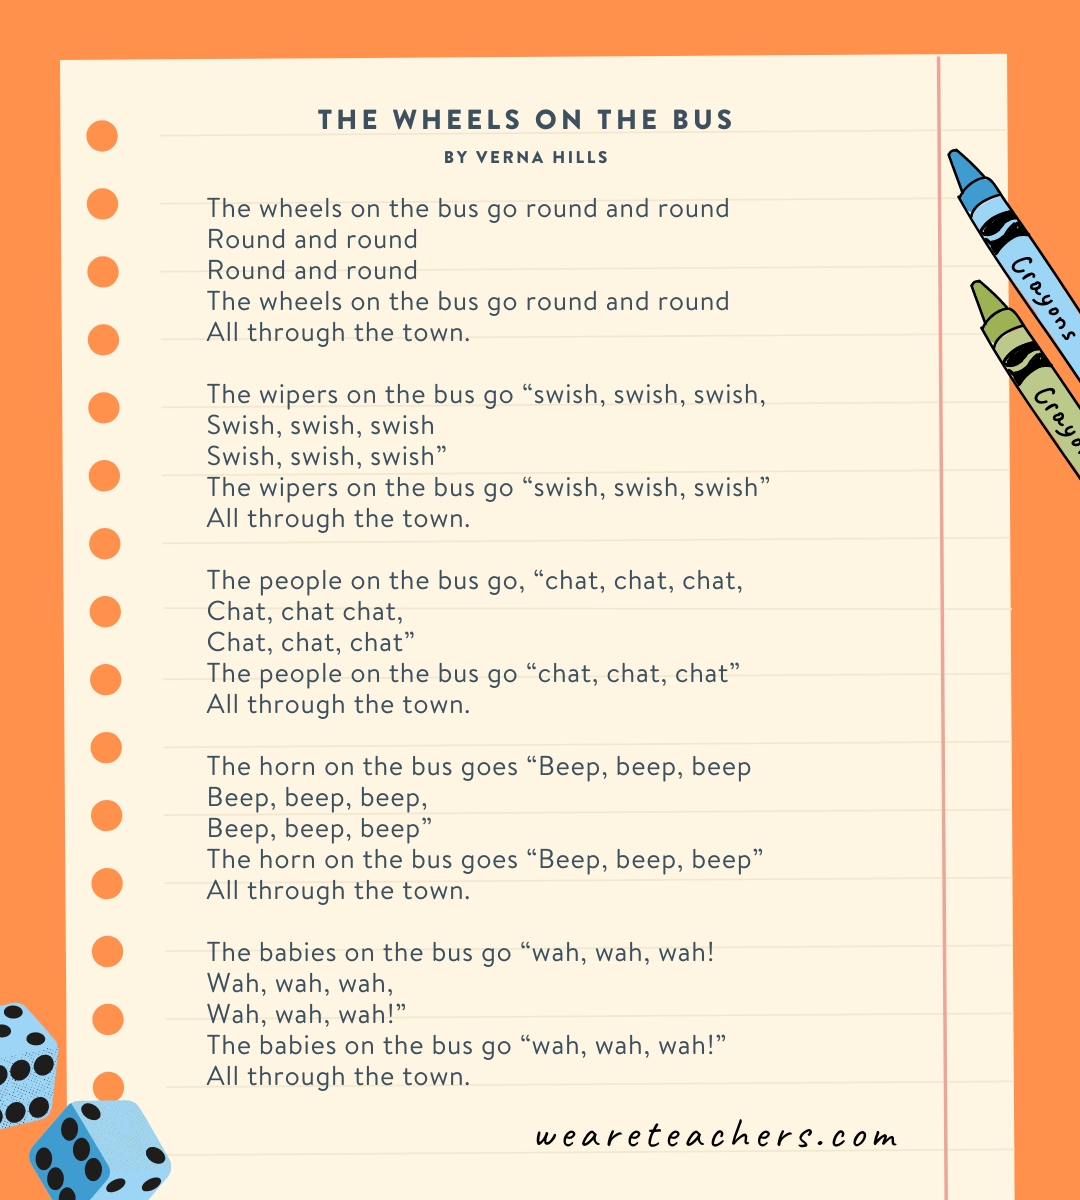 The Wheels on the Bus by Verna Hills